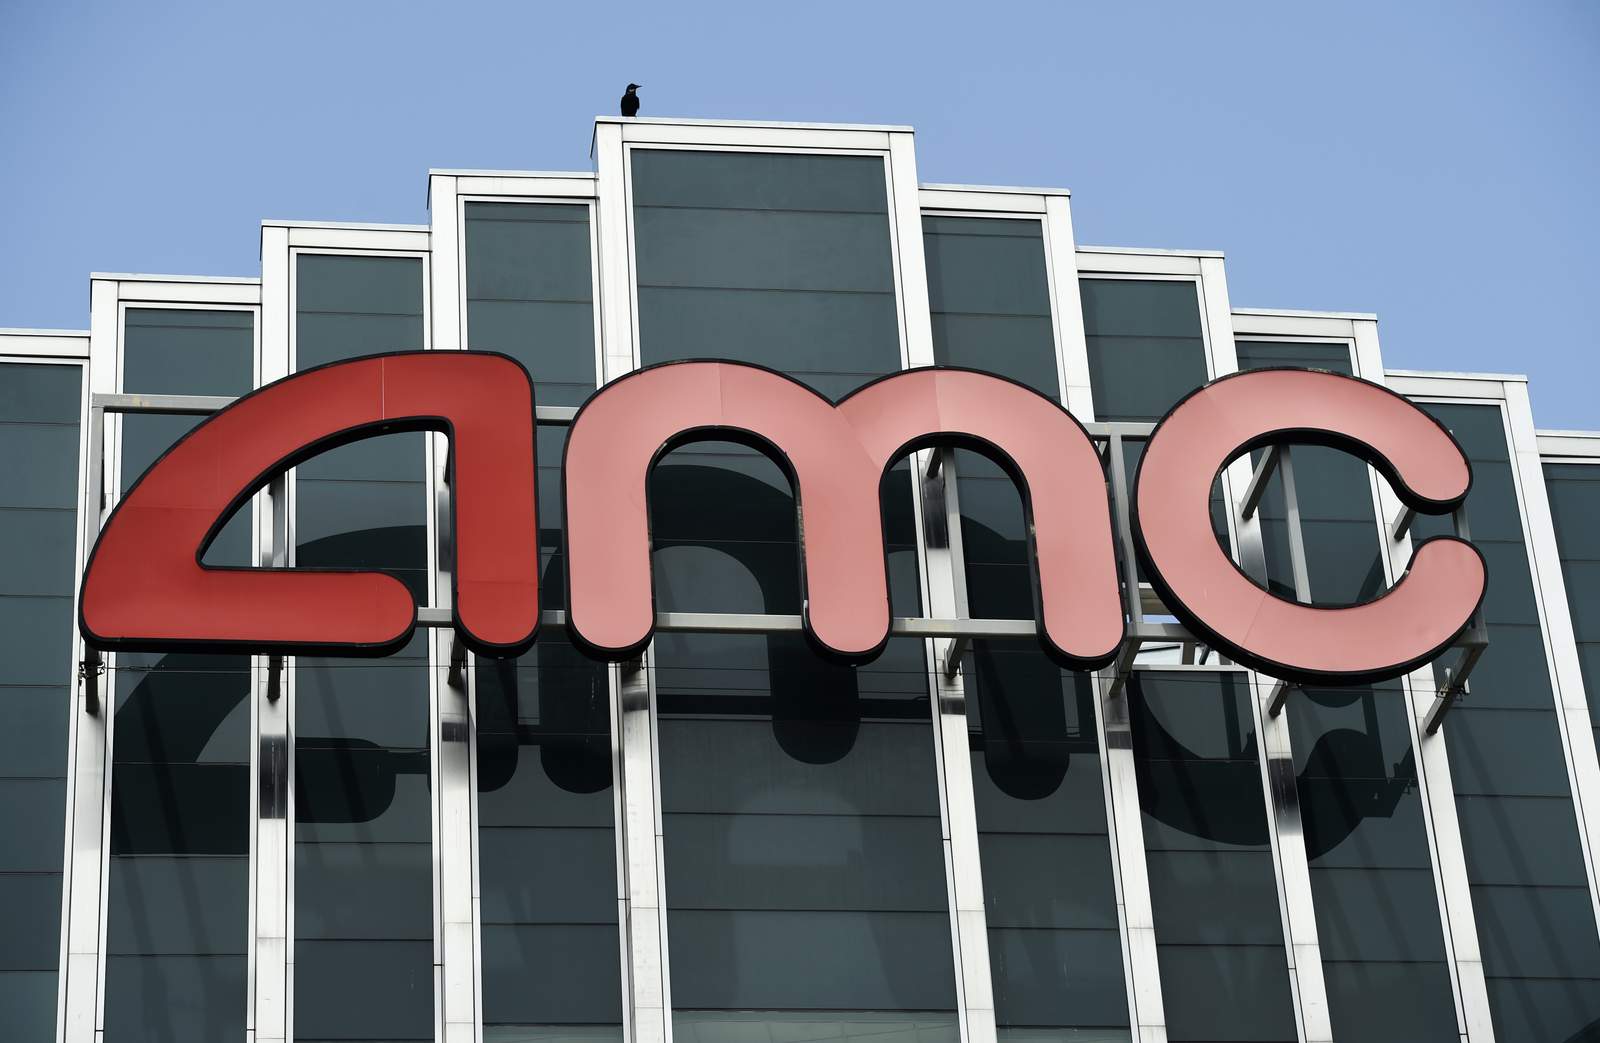 AMC Theatres welcome back movie-goers with $0.15 shows